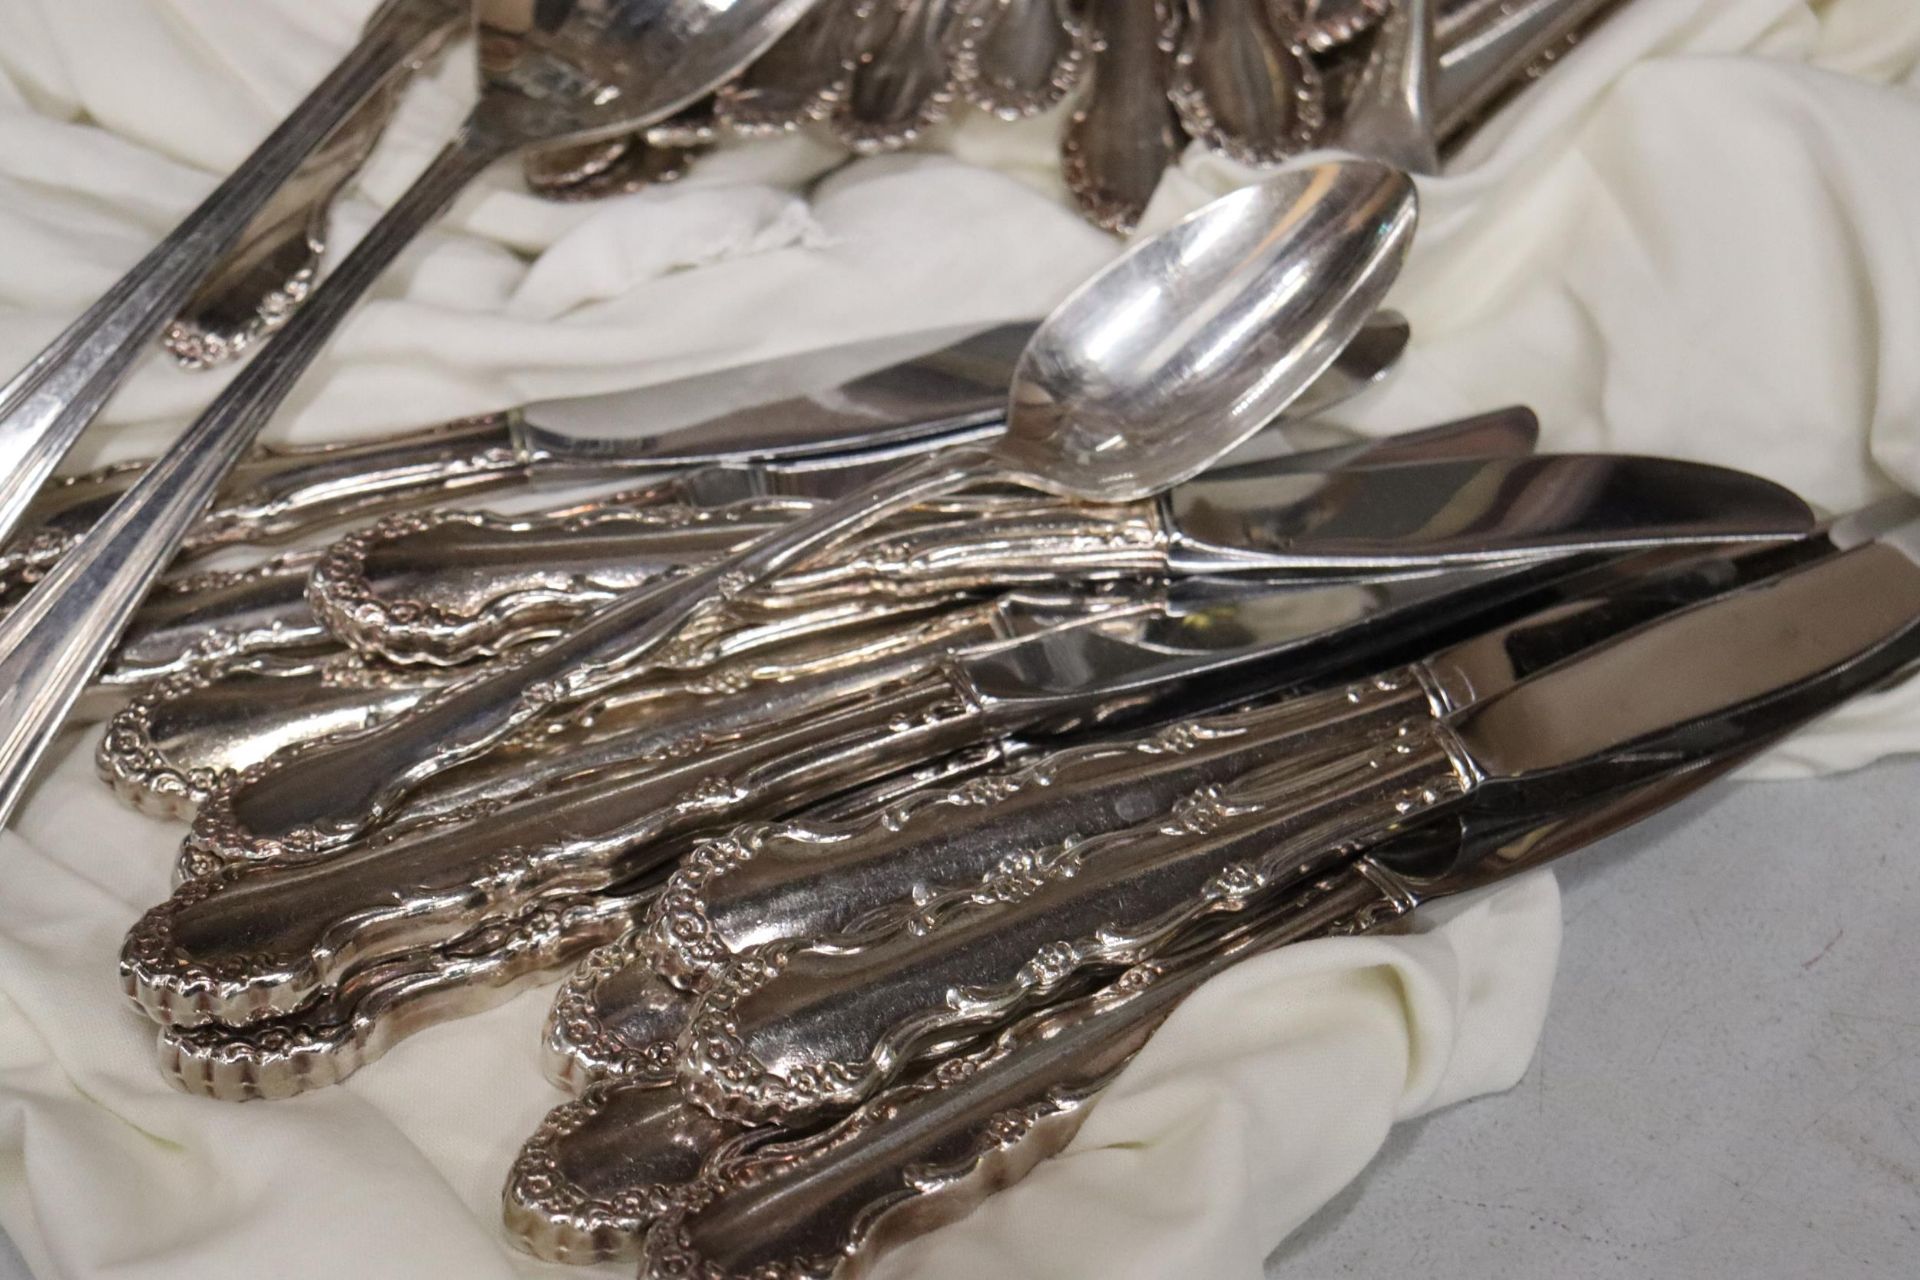 A QUANTITY OF FLATWARE, KNIVES, FORKS AND SPOONS - Image 2 of 9